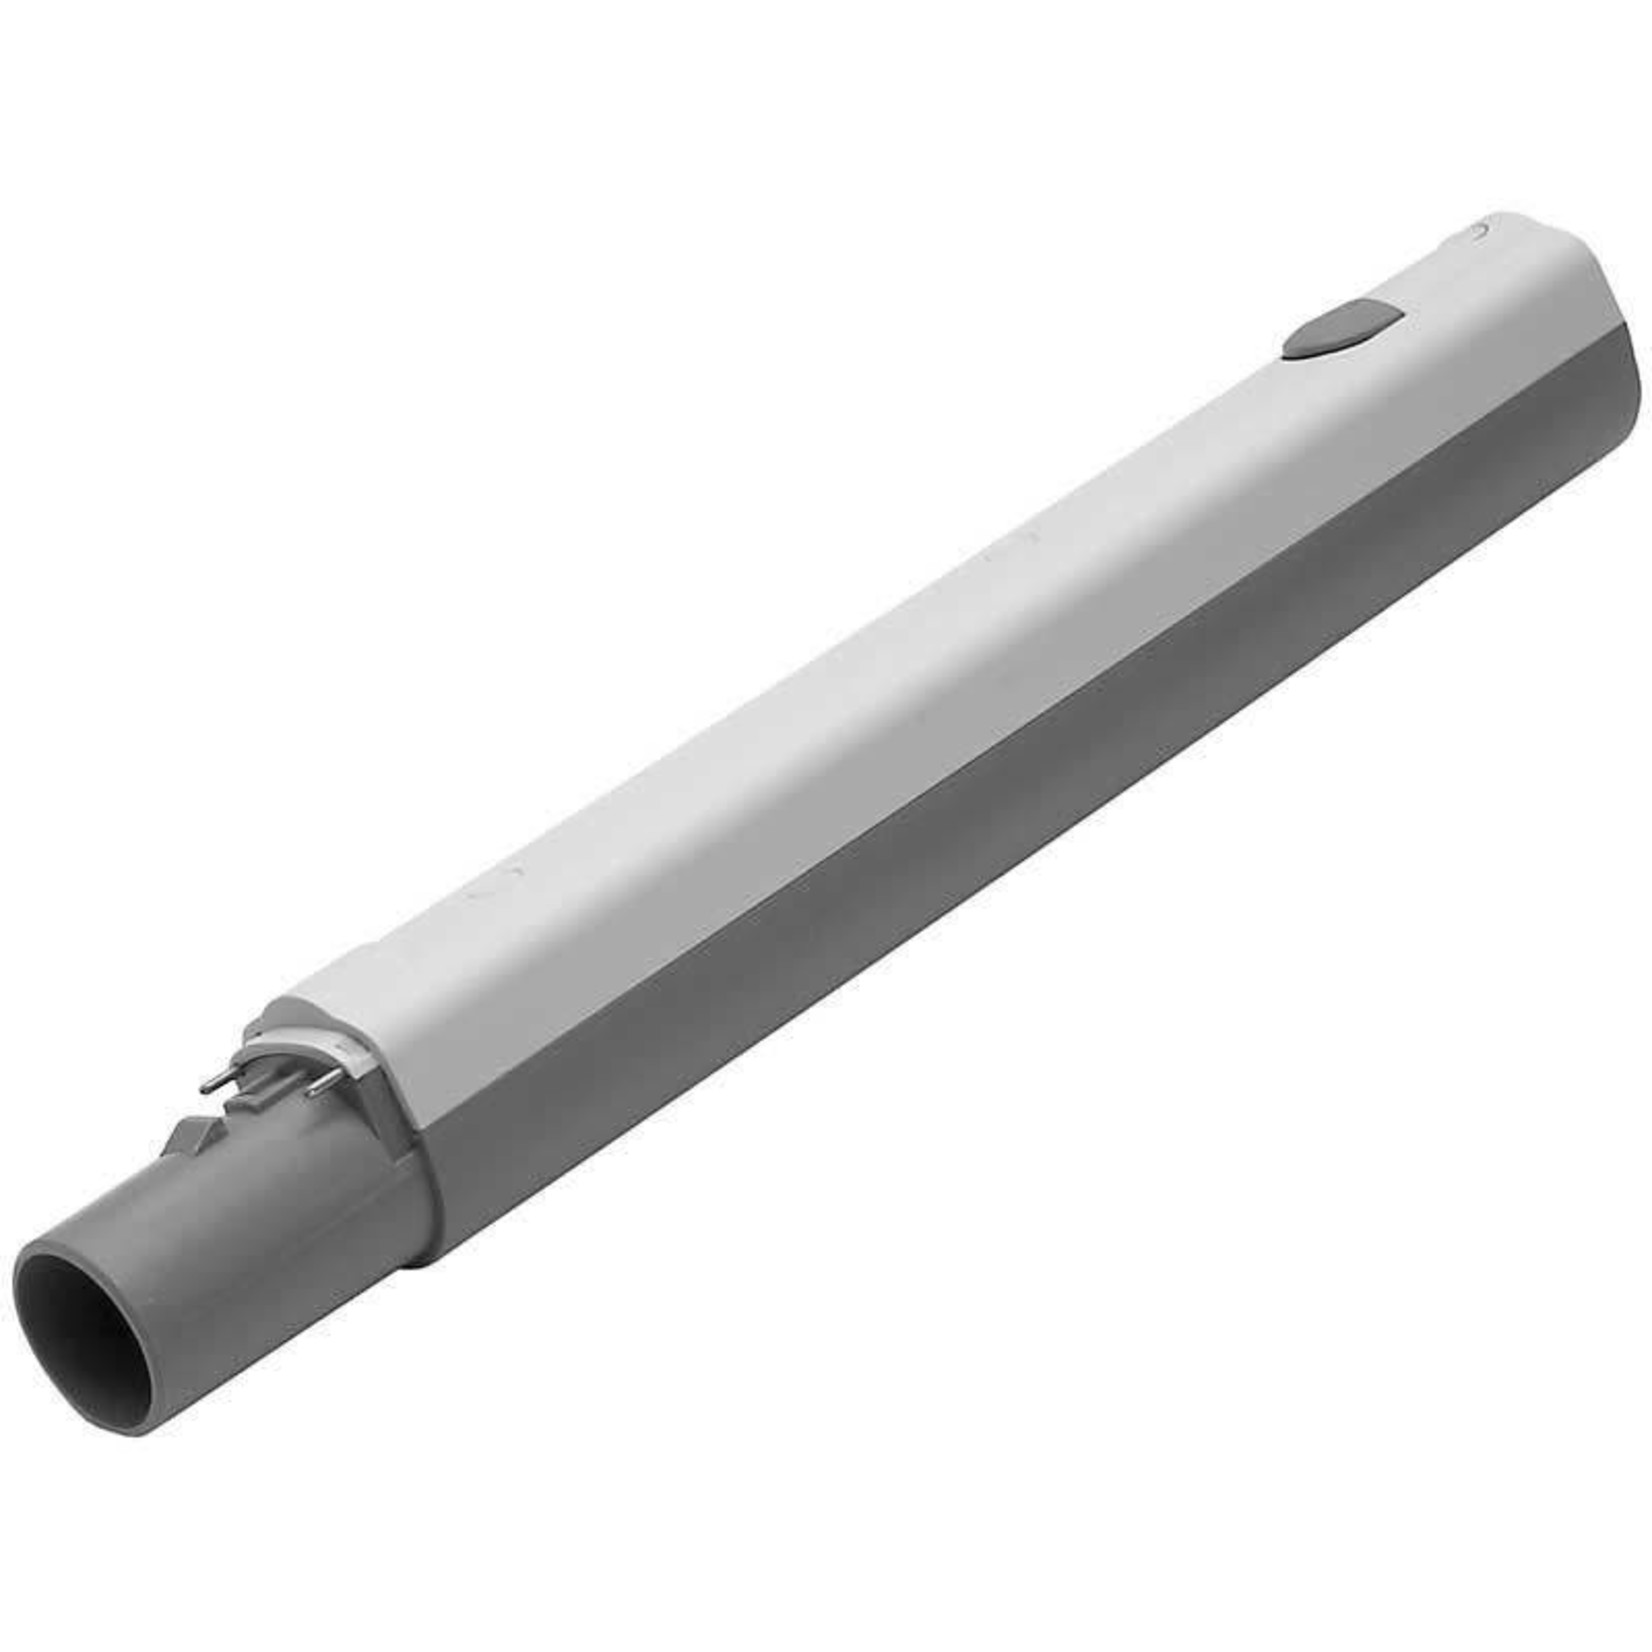 Electrolux Electrolux/Aerus 2-Pin Wand - Color Varies